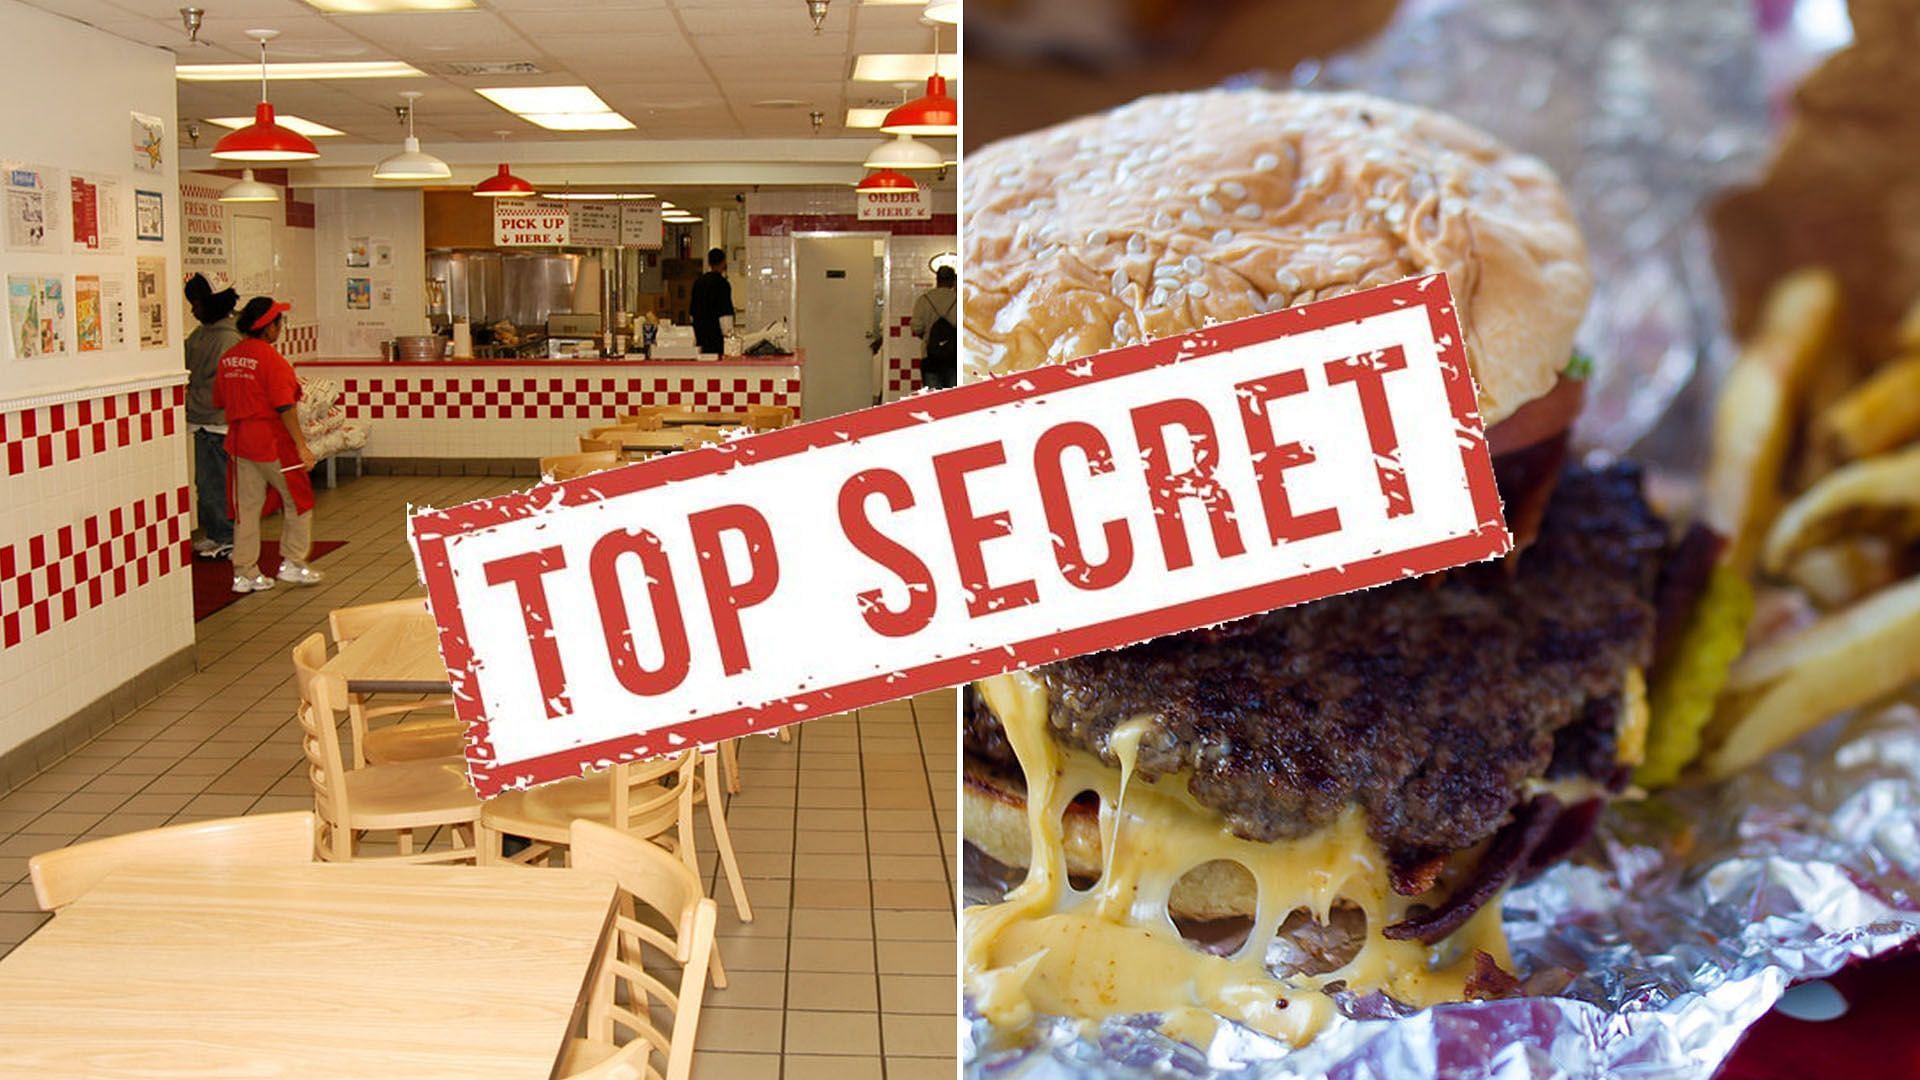 5 Guys secret menu dishes including a double grilled cheeseburger